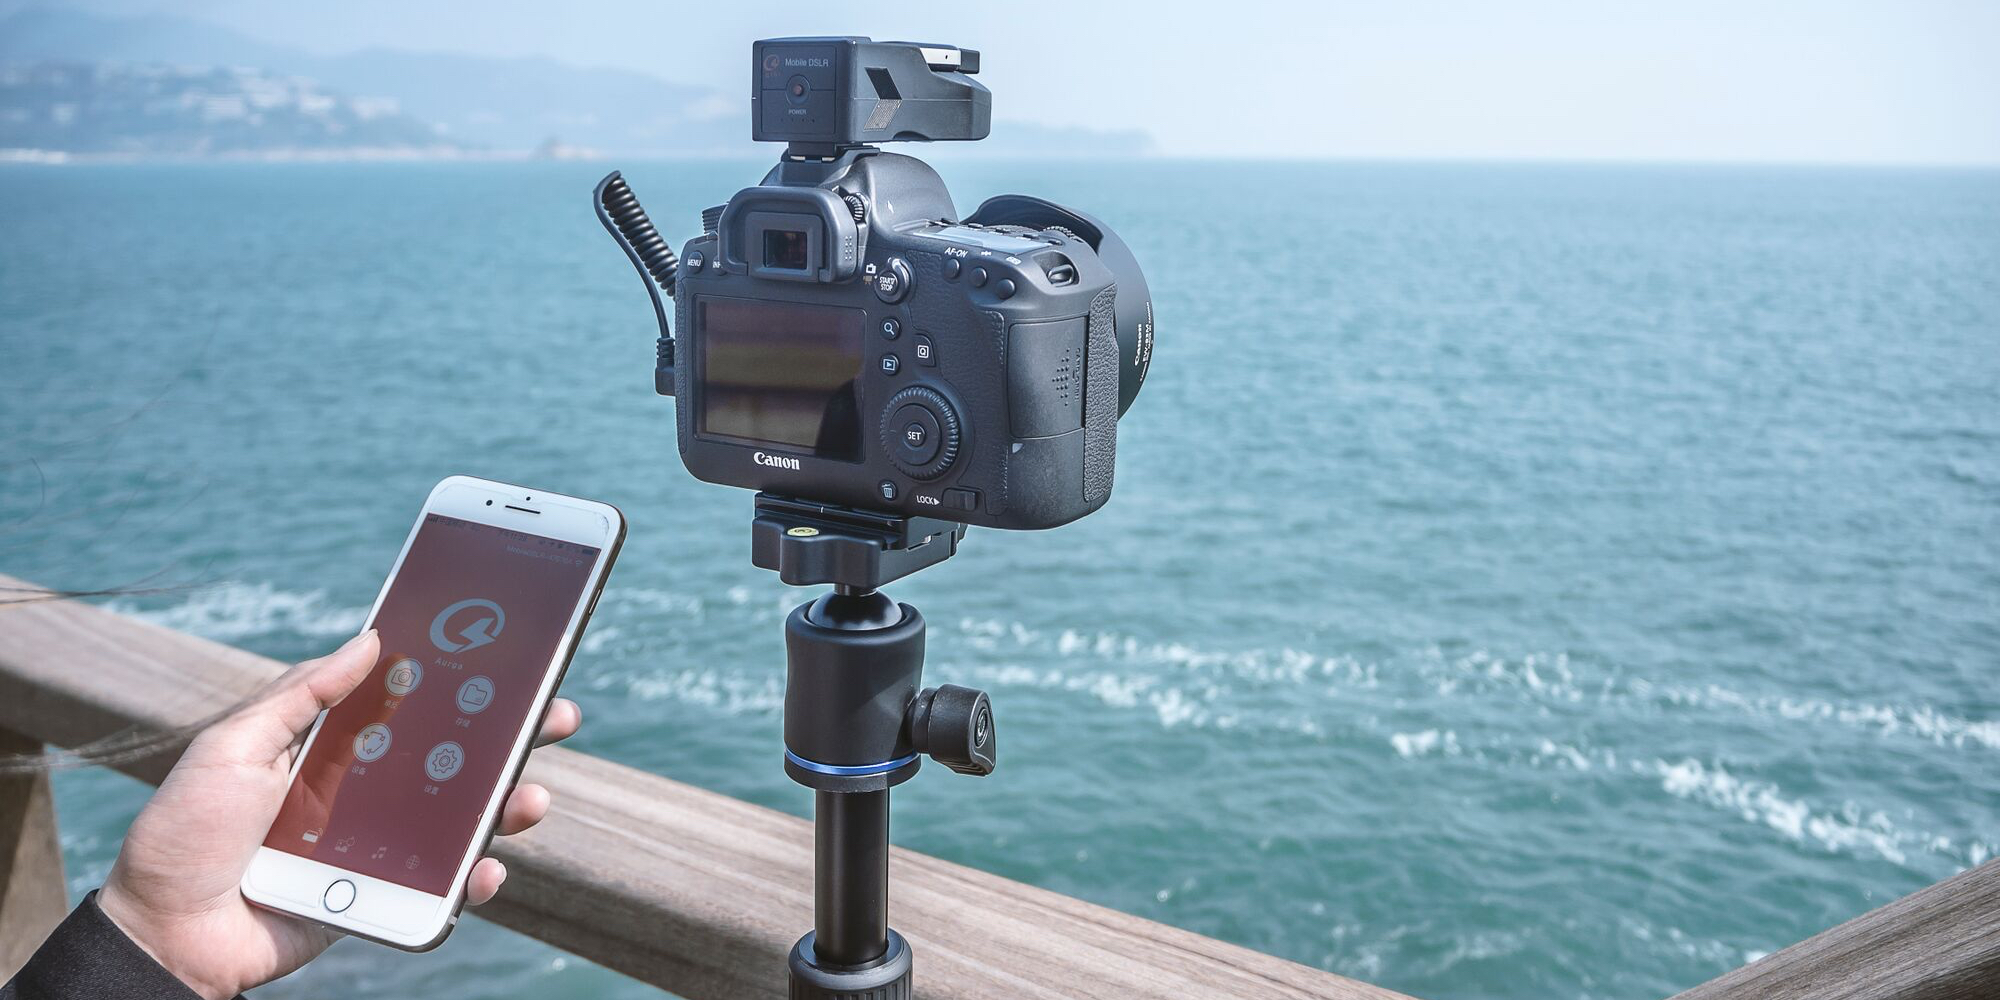 Aurga is the 'world's first smart DSLR assistant' to help you take your